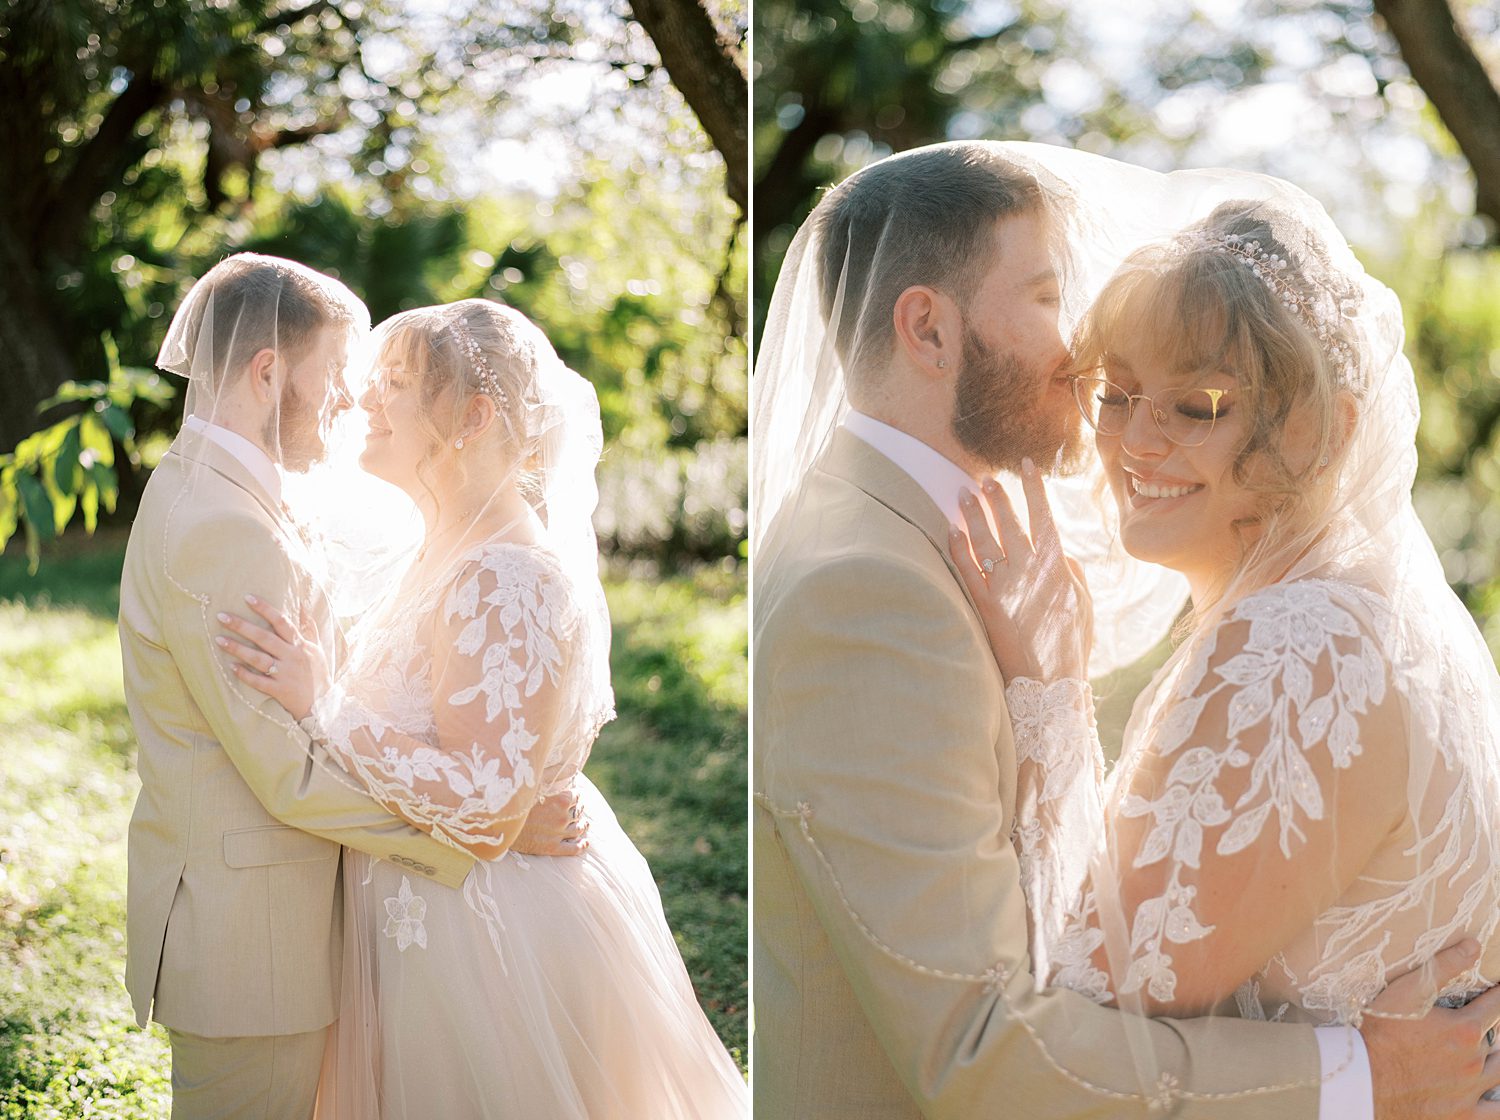 newlyweds kiss under bride's veil at Events Under the Oaks